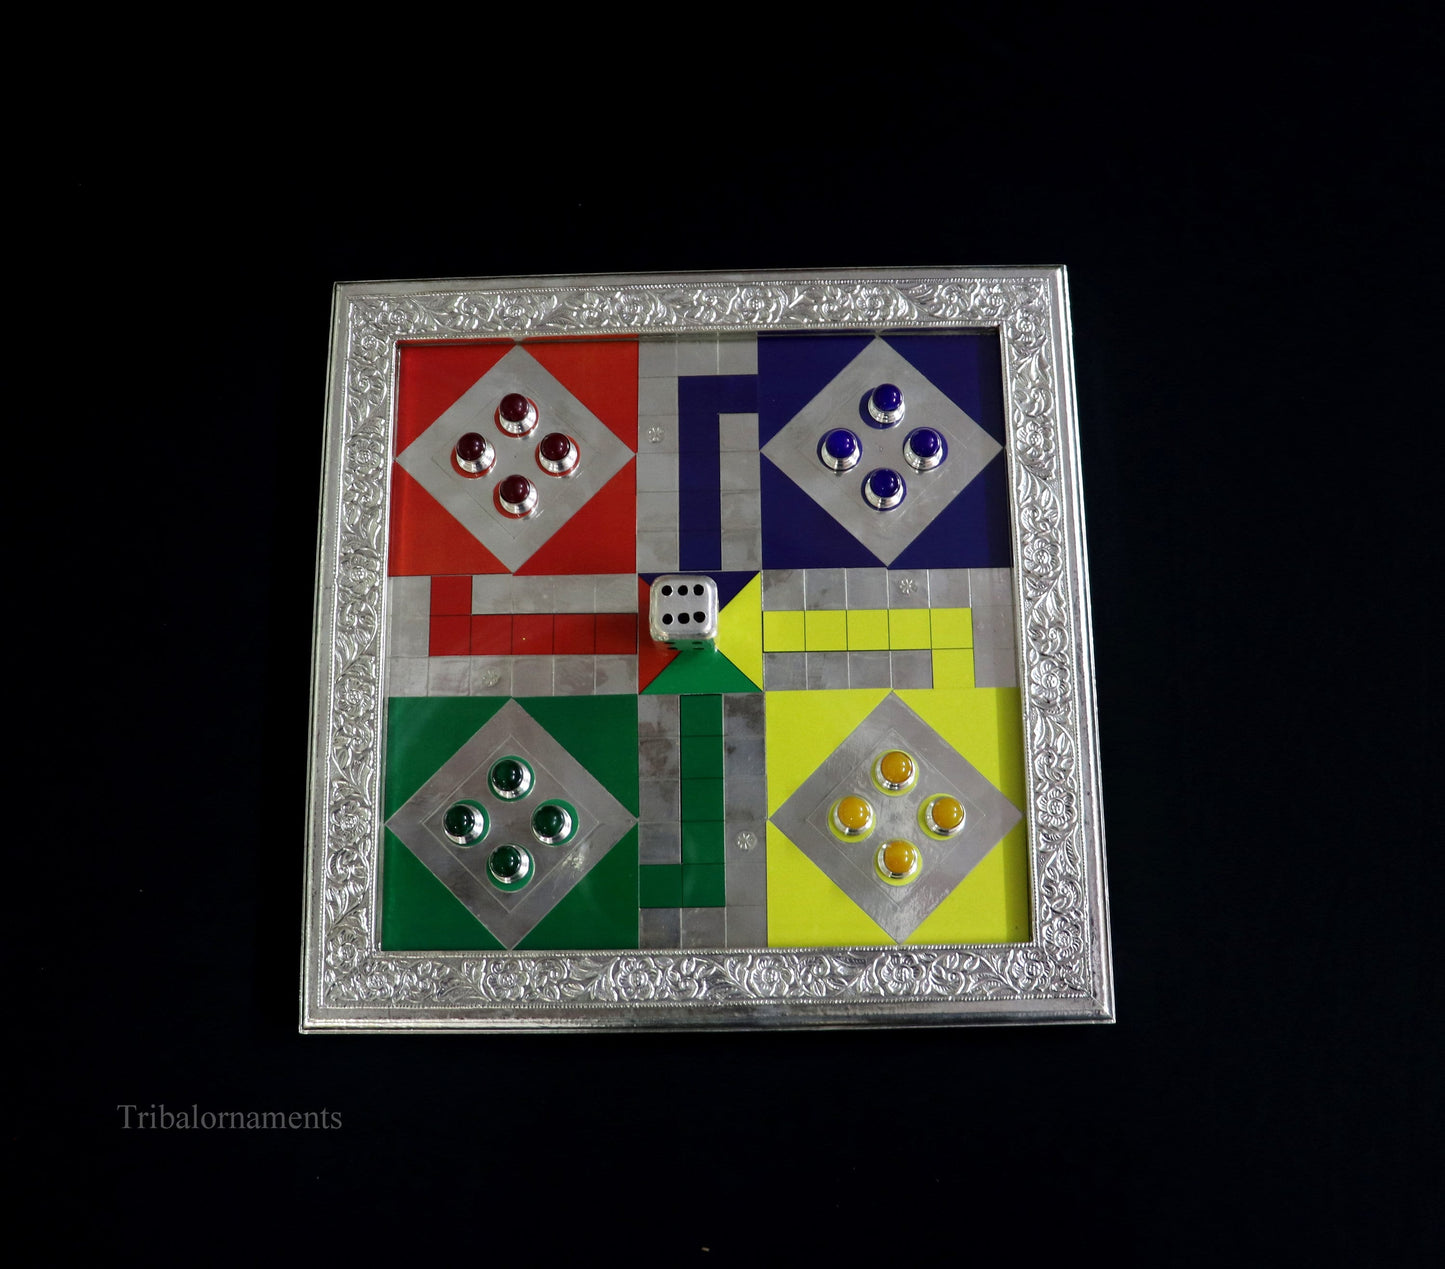 925 sterling silver work LUDO Game, Amazing customized handcrafted design on wooden base, fabulous Royal silver article from india fr05 - TRIBAL ORNAMENTS